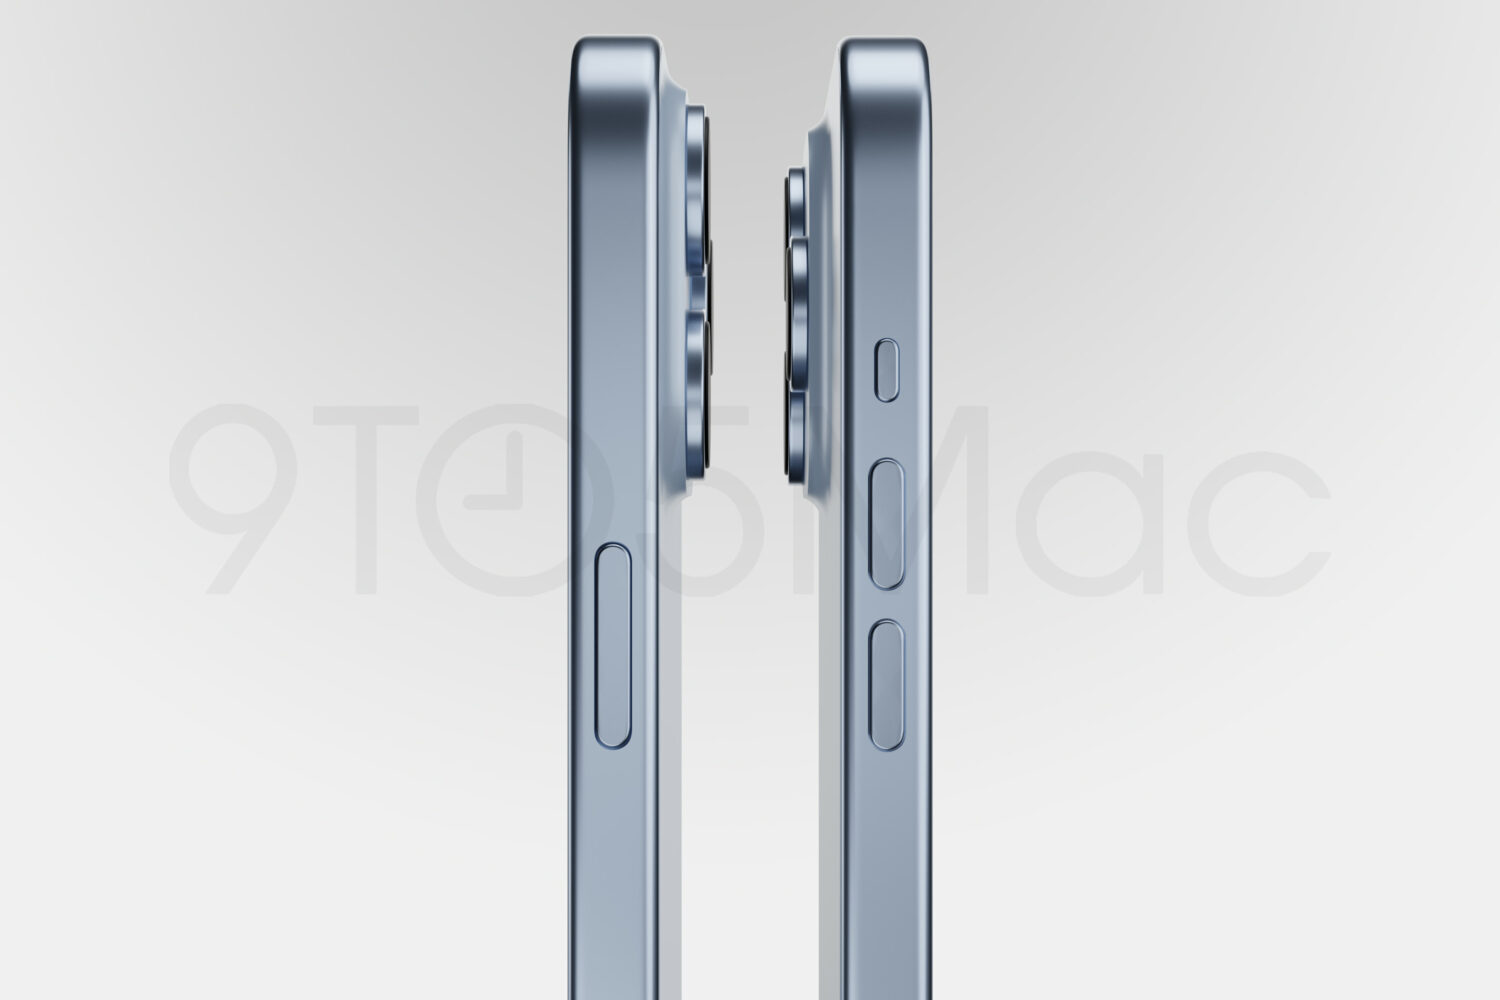 Rendering showing the side views of the iPhone 15 Pro with mechanical power, volume and mute buttons